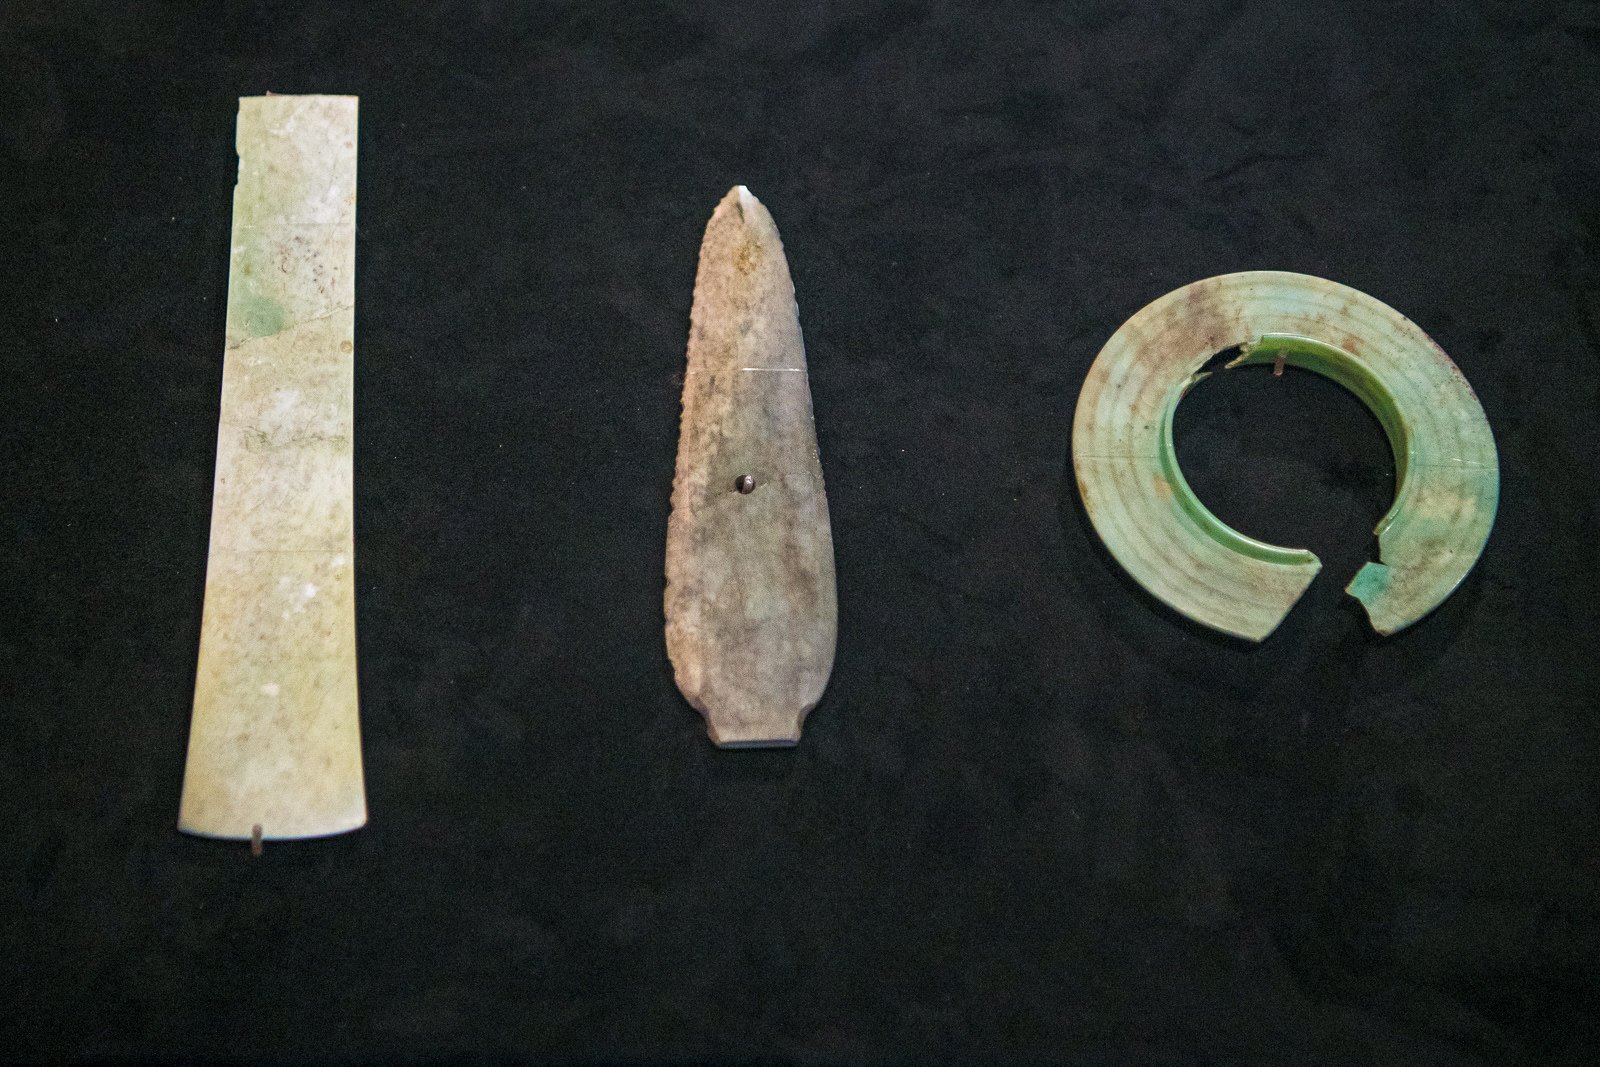 The latest artefacts discovered at the Sanxingdui site include pieces of finished and raw jade, as well as stone scraps and fragments, representing various stages of the production process. Photo: Xinhua